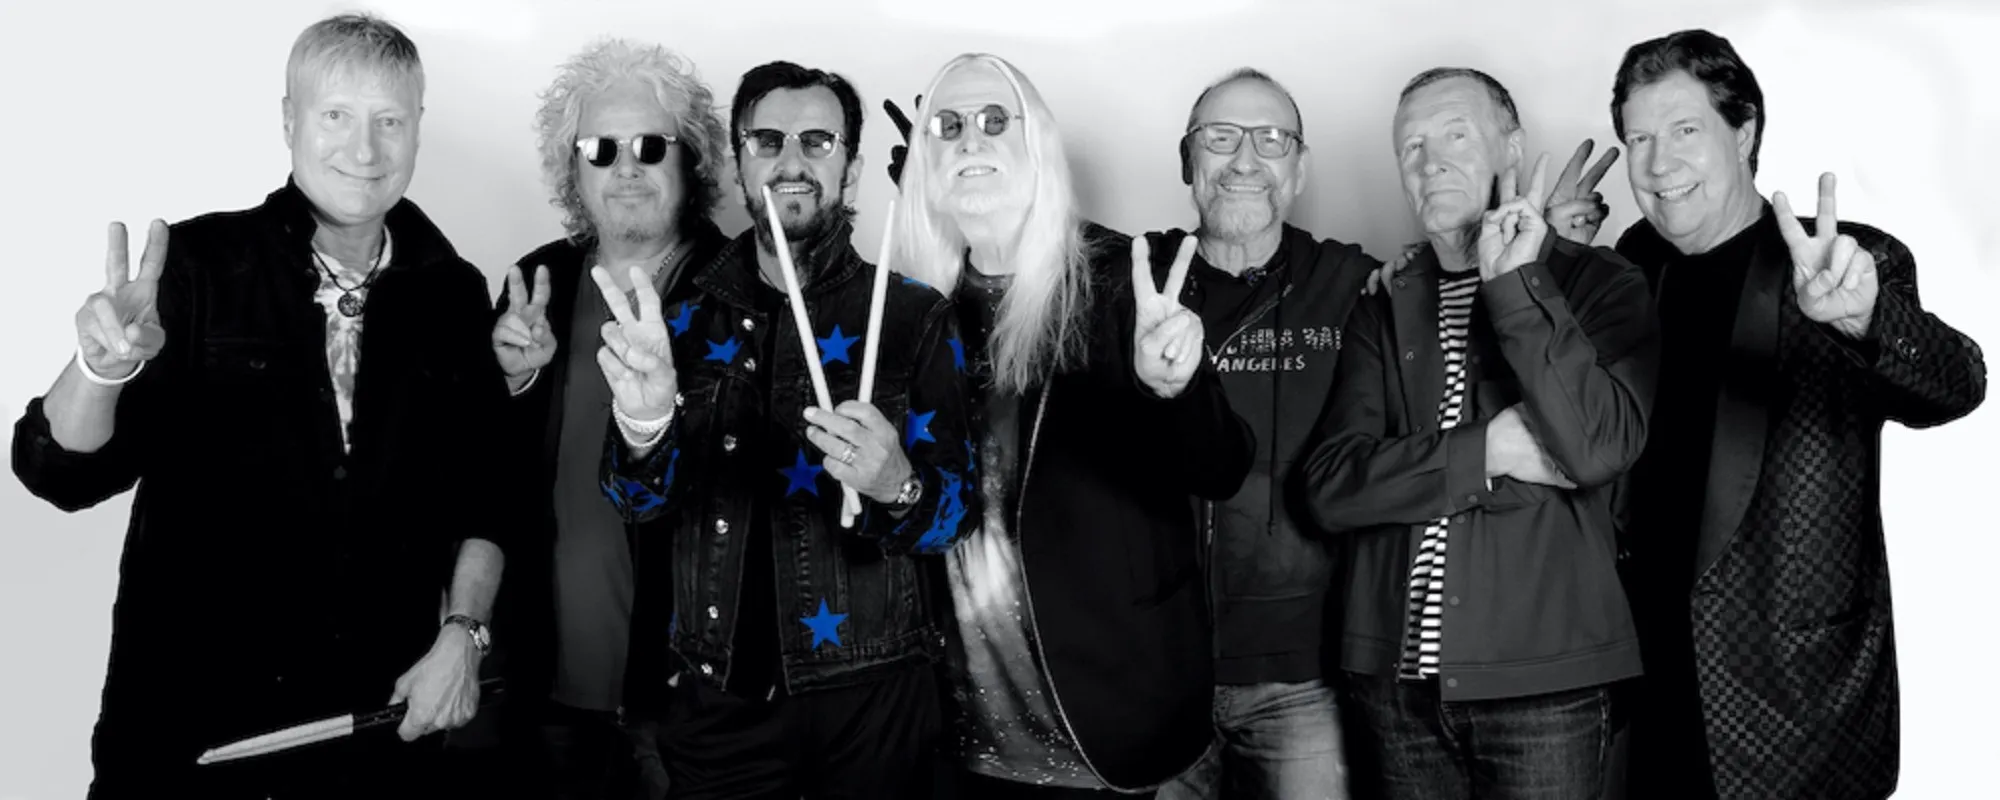 “No No Songs”: Ringo Starr Explains Why He Won’t Be Playing Tunes from ‘Crooked Boy’ EP on All Starr Band Tour